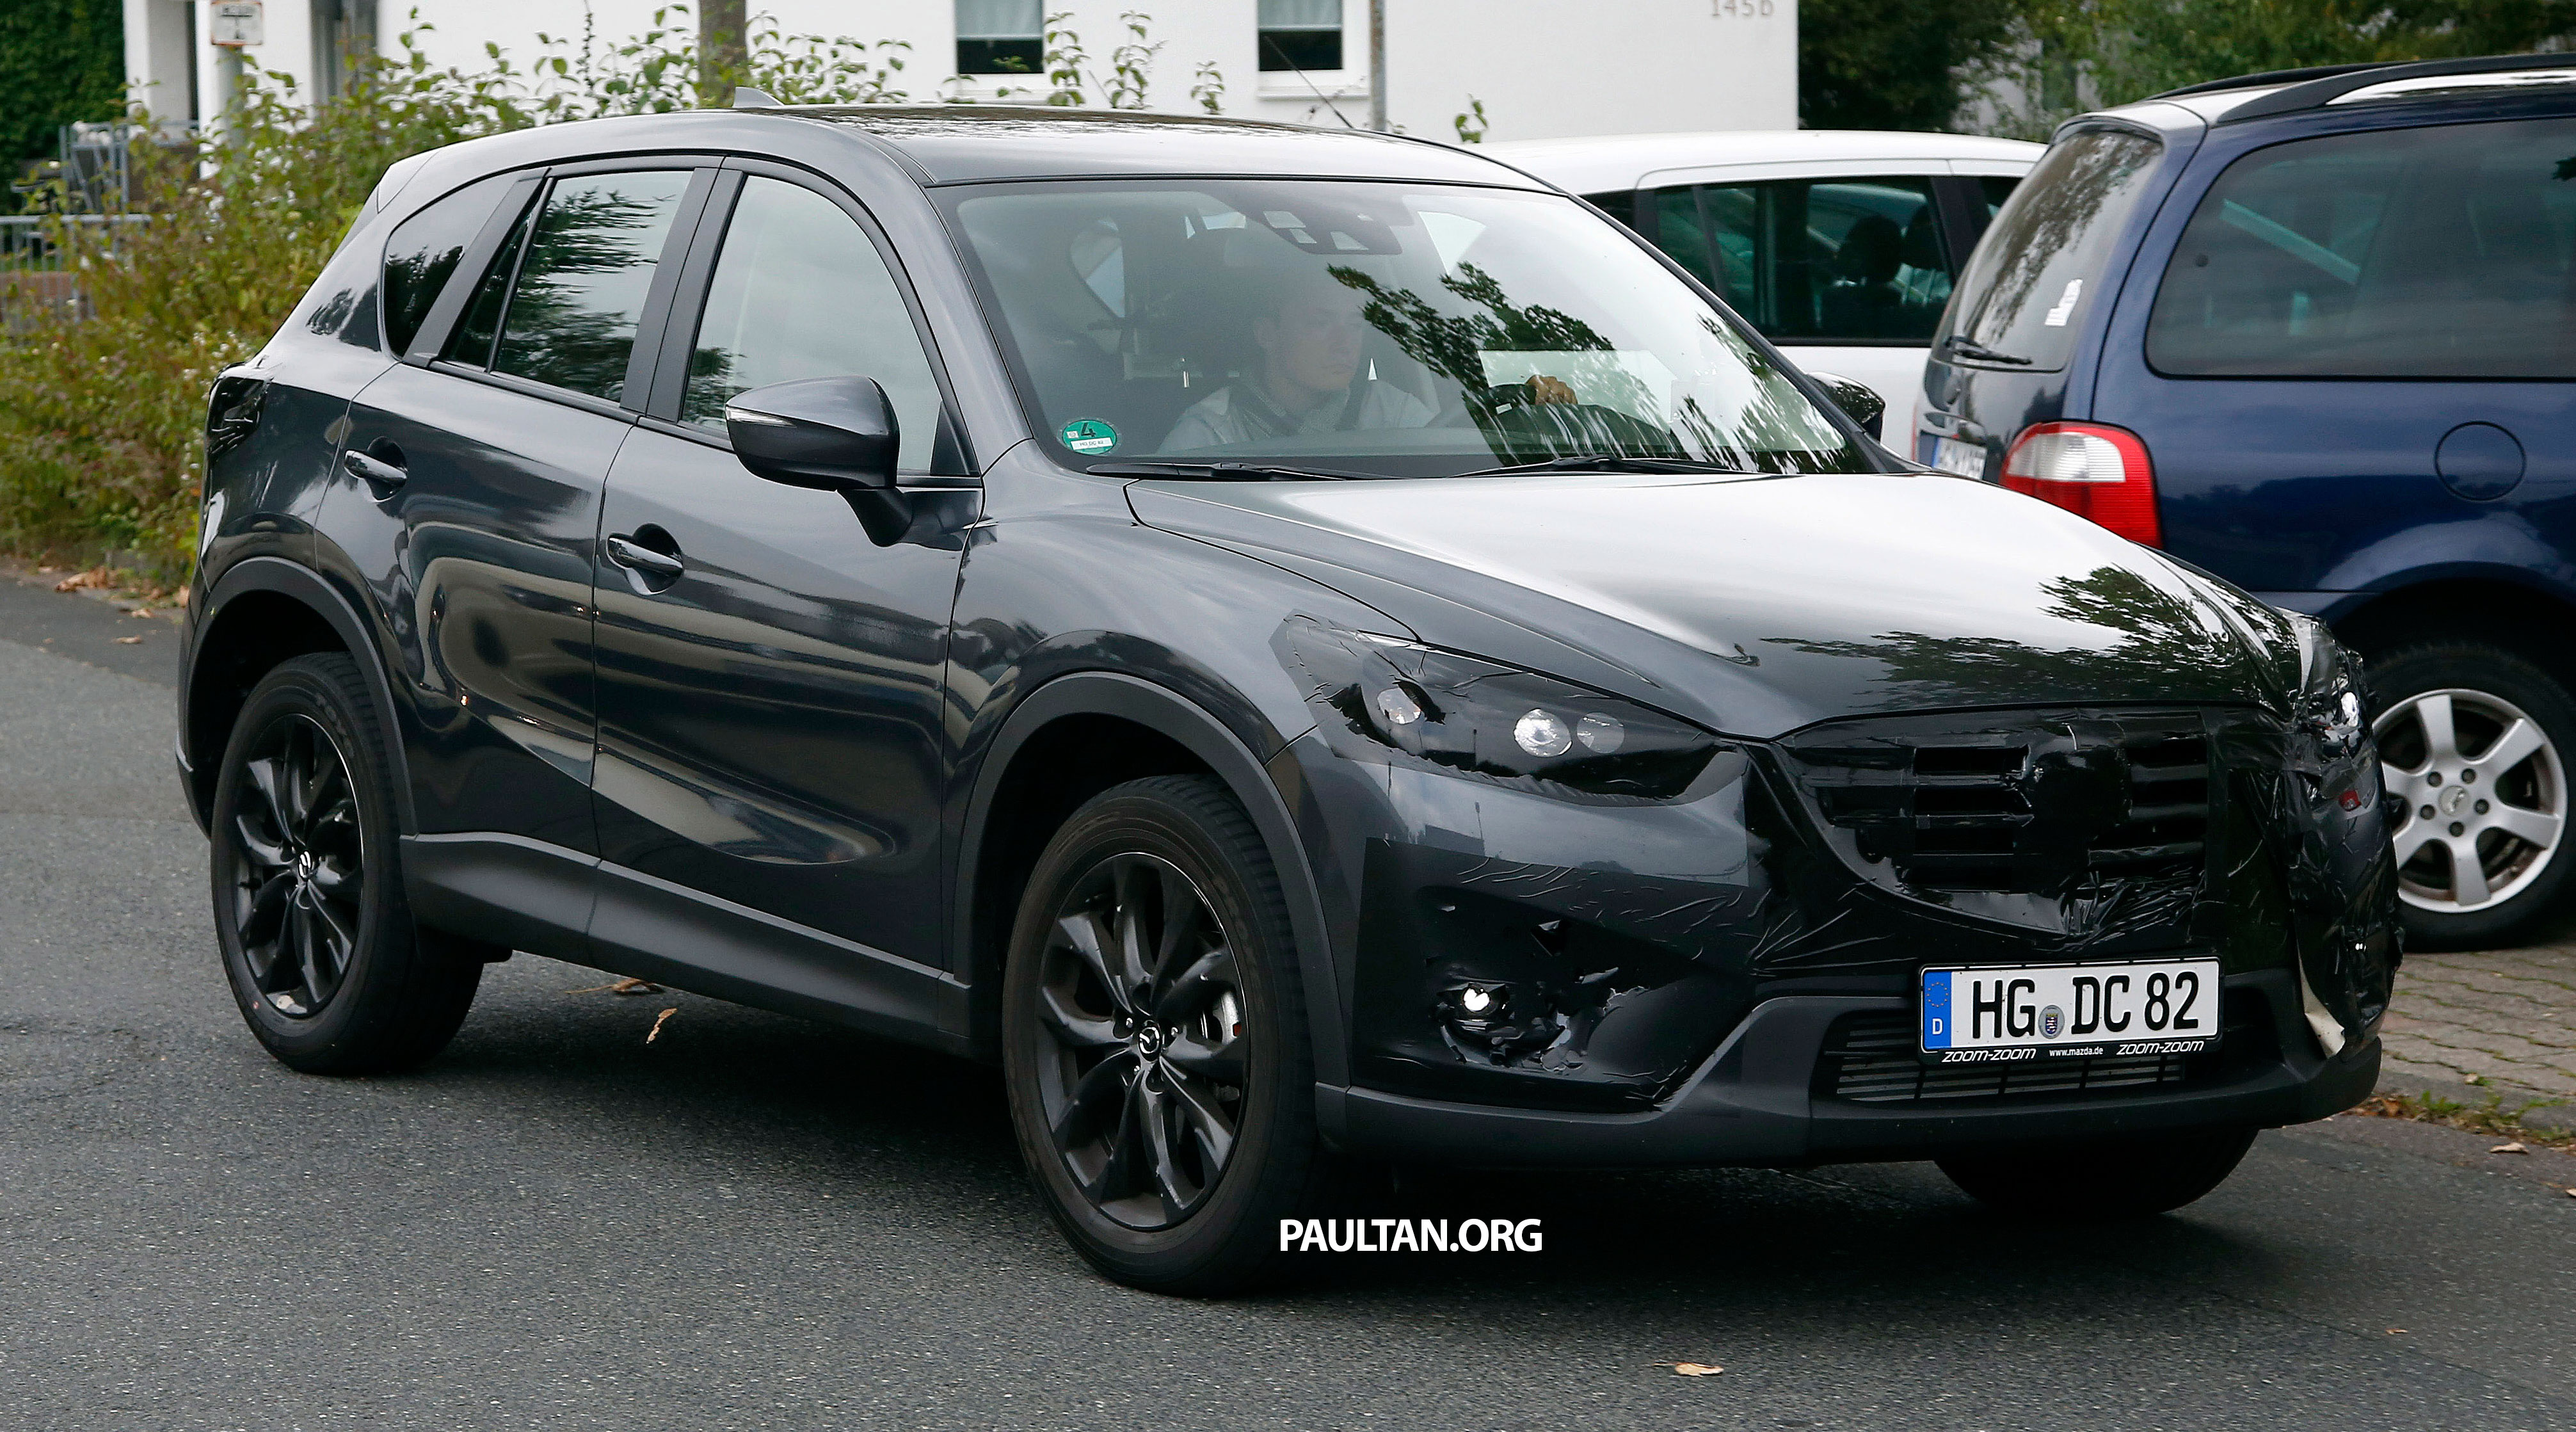 SPYSHOTS: Mazda CX-5 facelift - new grille and lamps Mazda-CX-5 ...